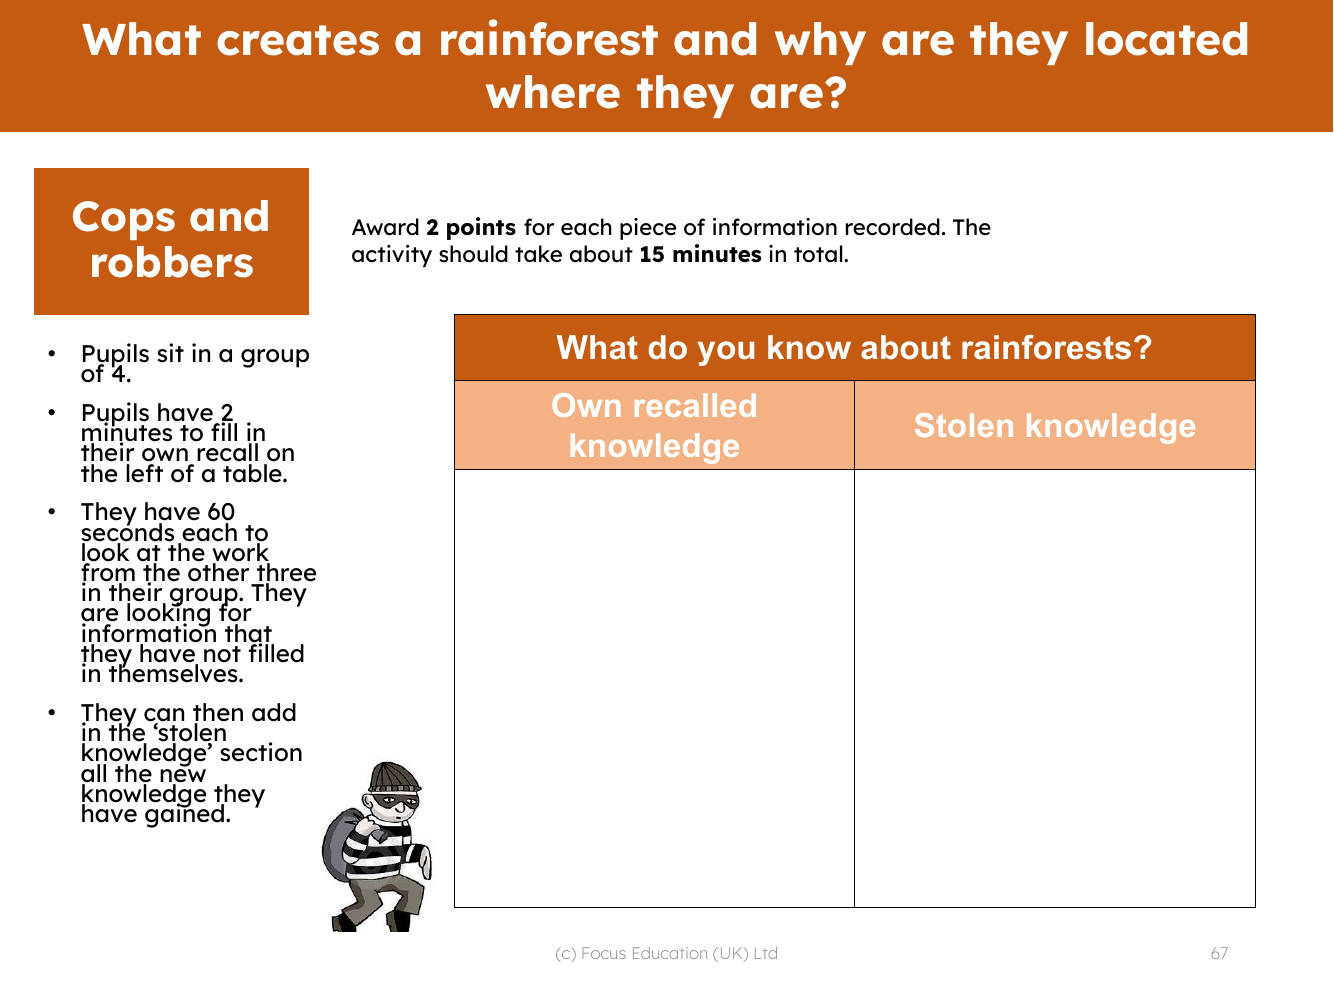 Cops and robbers - What do you know about rainforests?